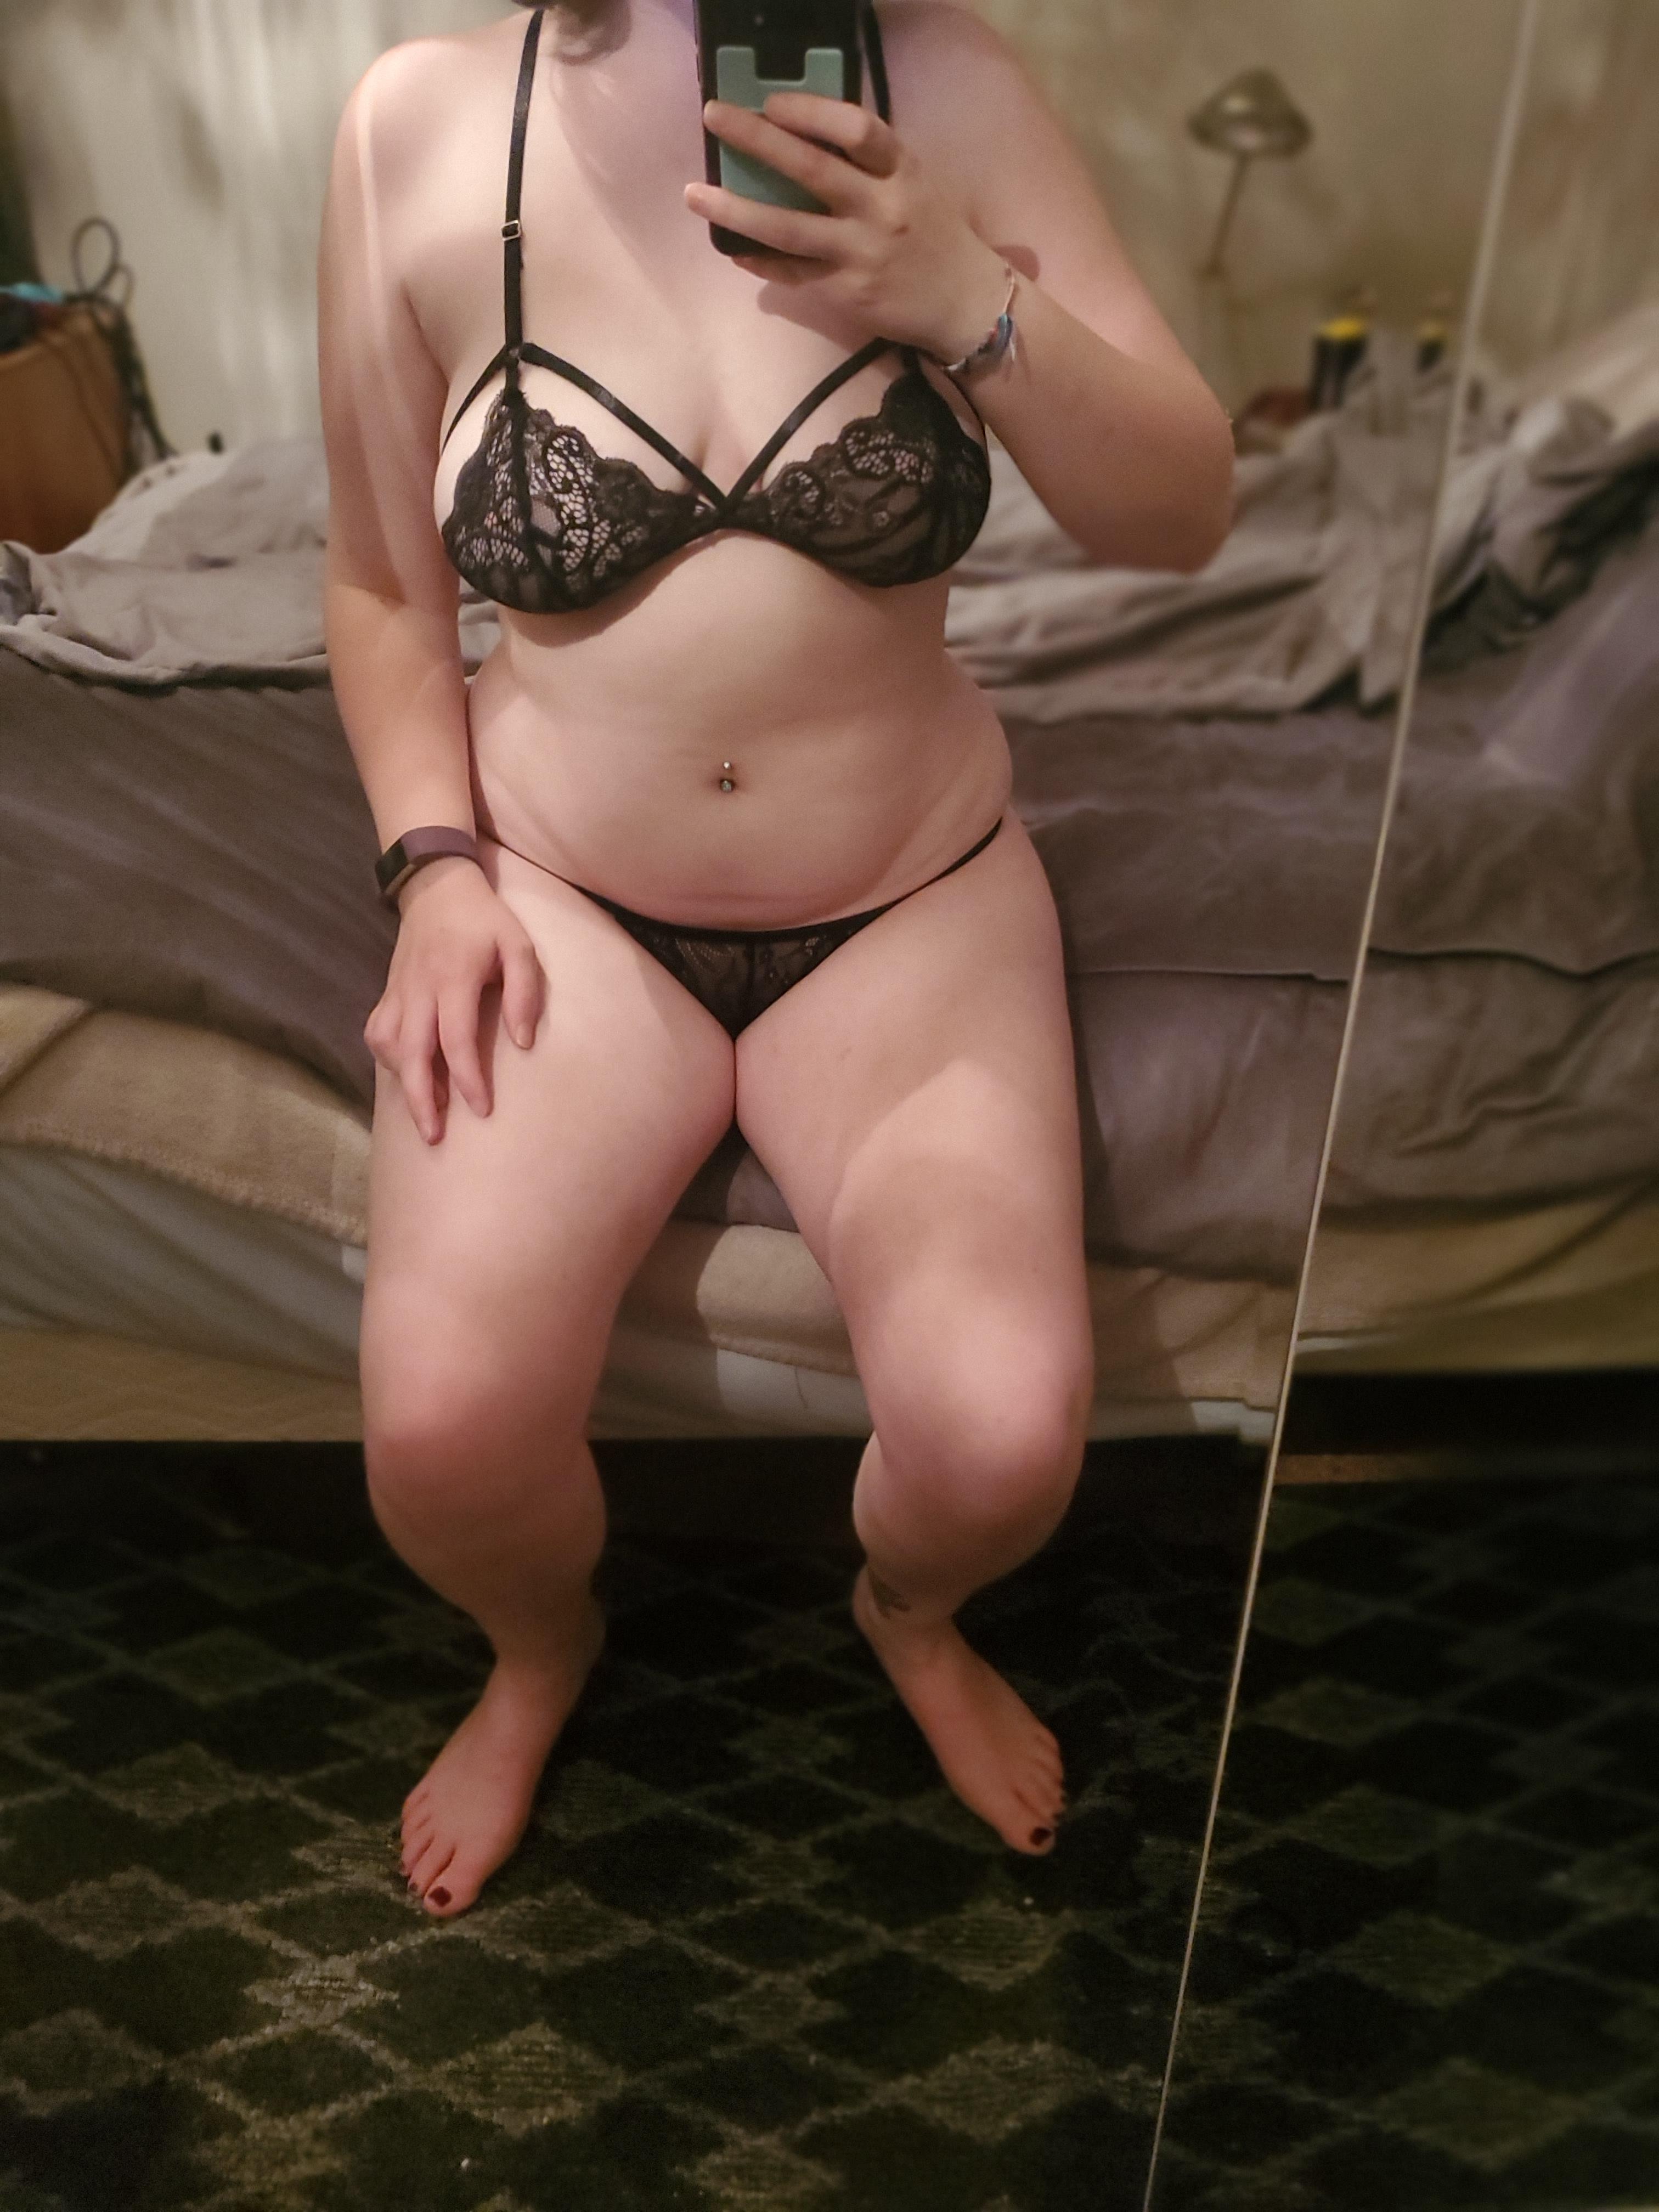 Chubby in lingerie